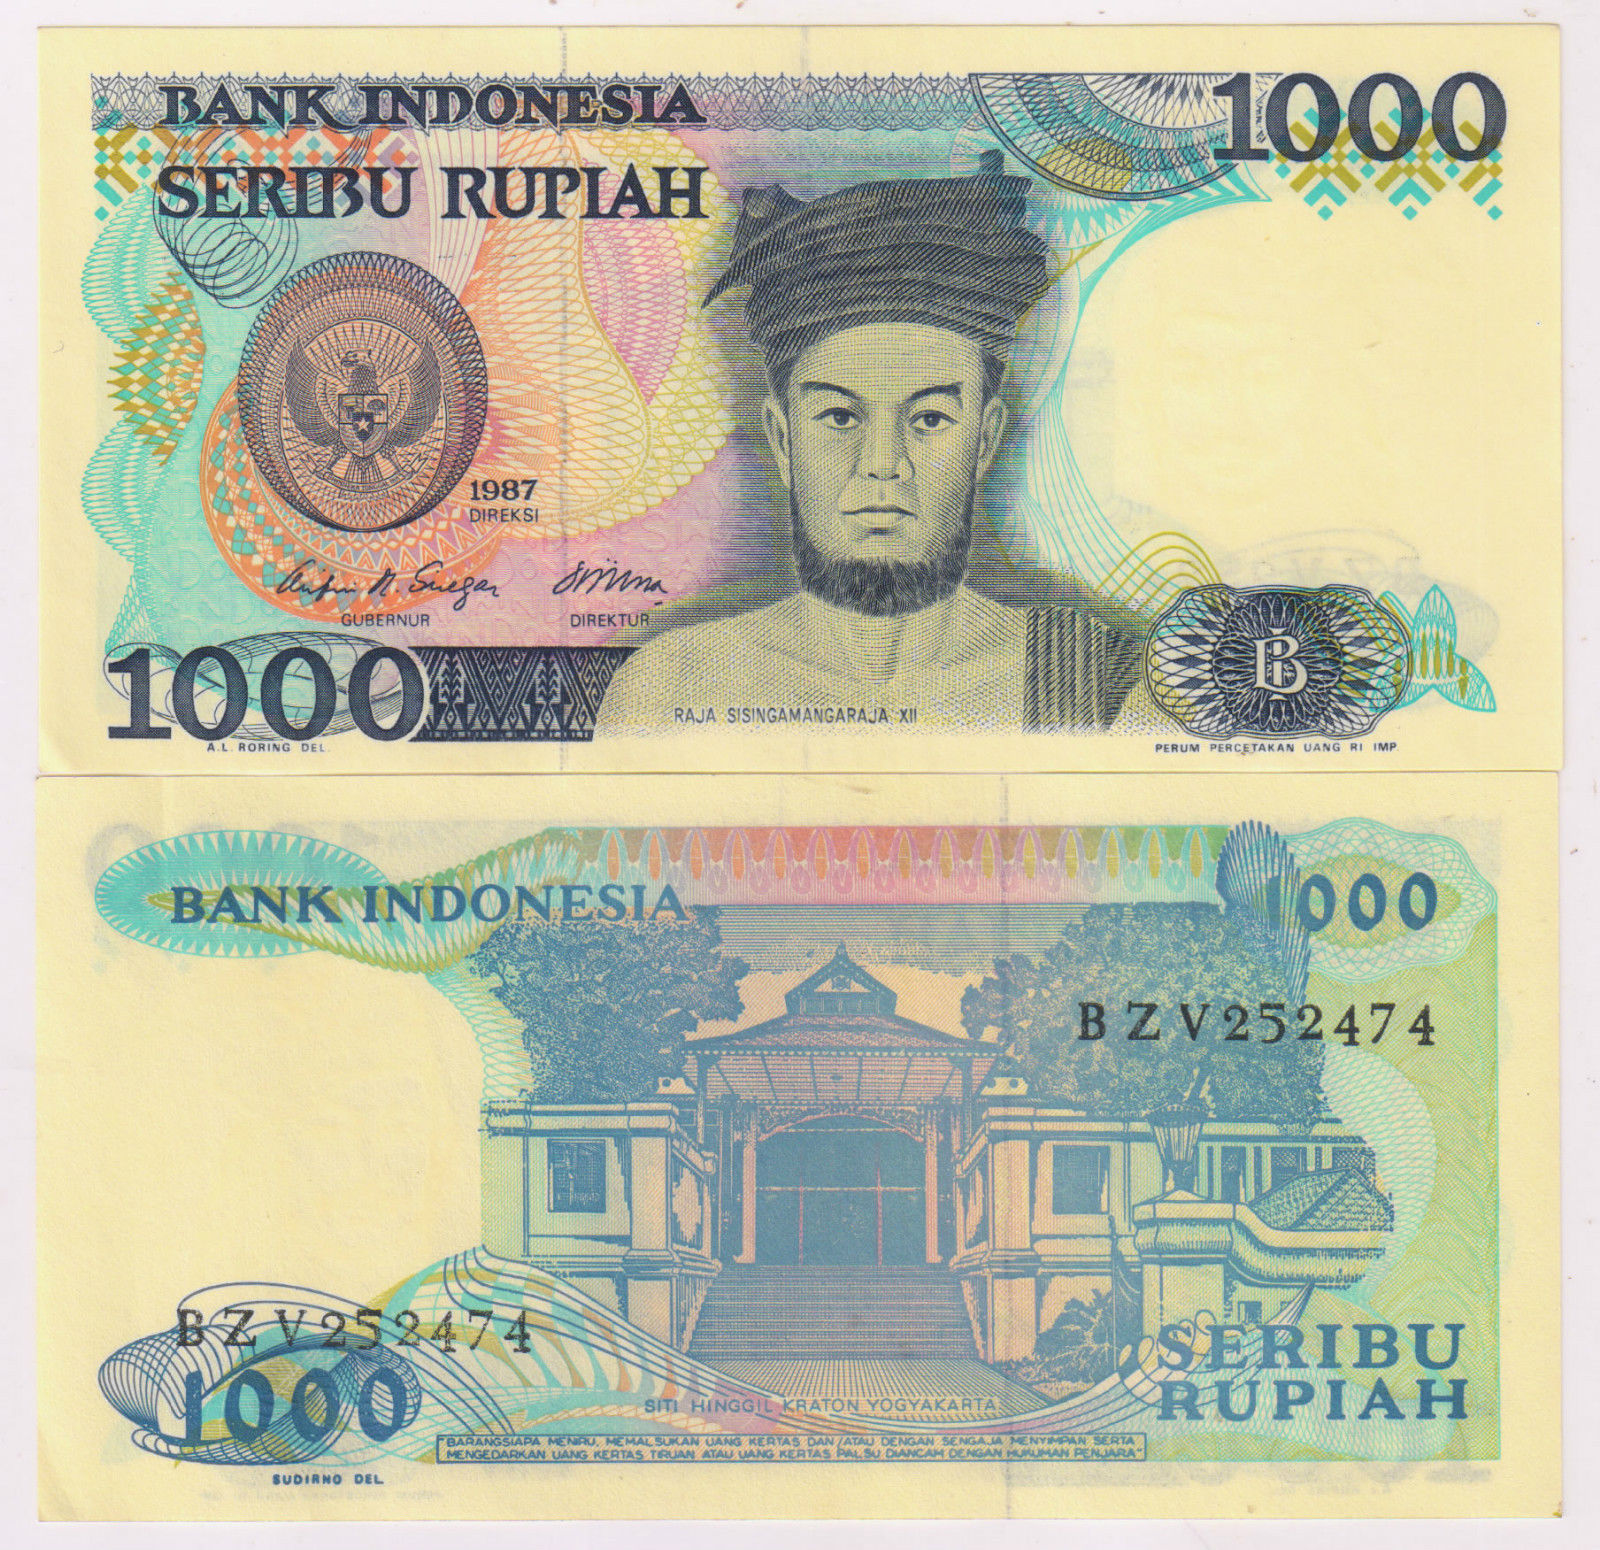  Indonesia  1000 rupia 1987 unc currency  note  KB Coins 